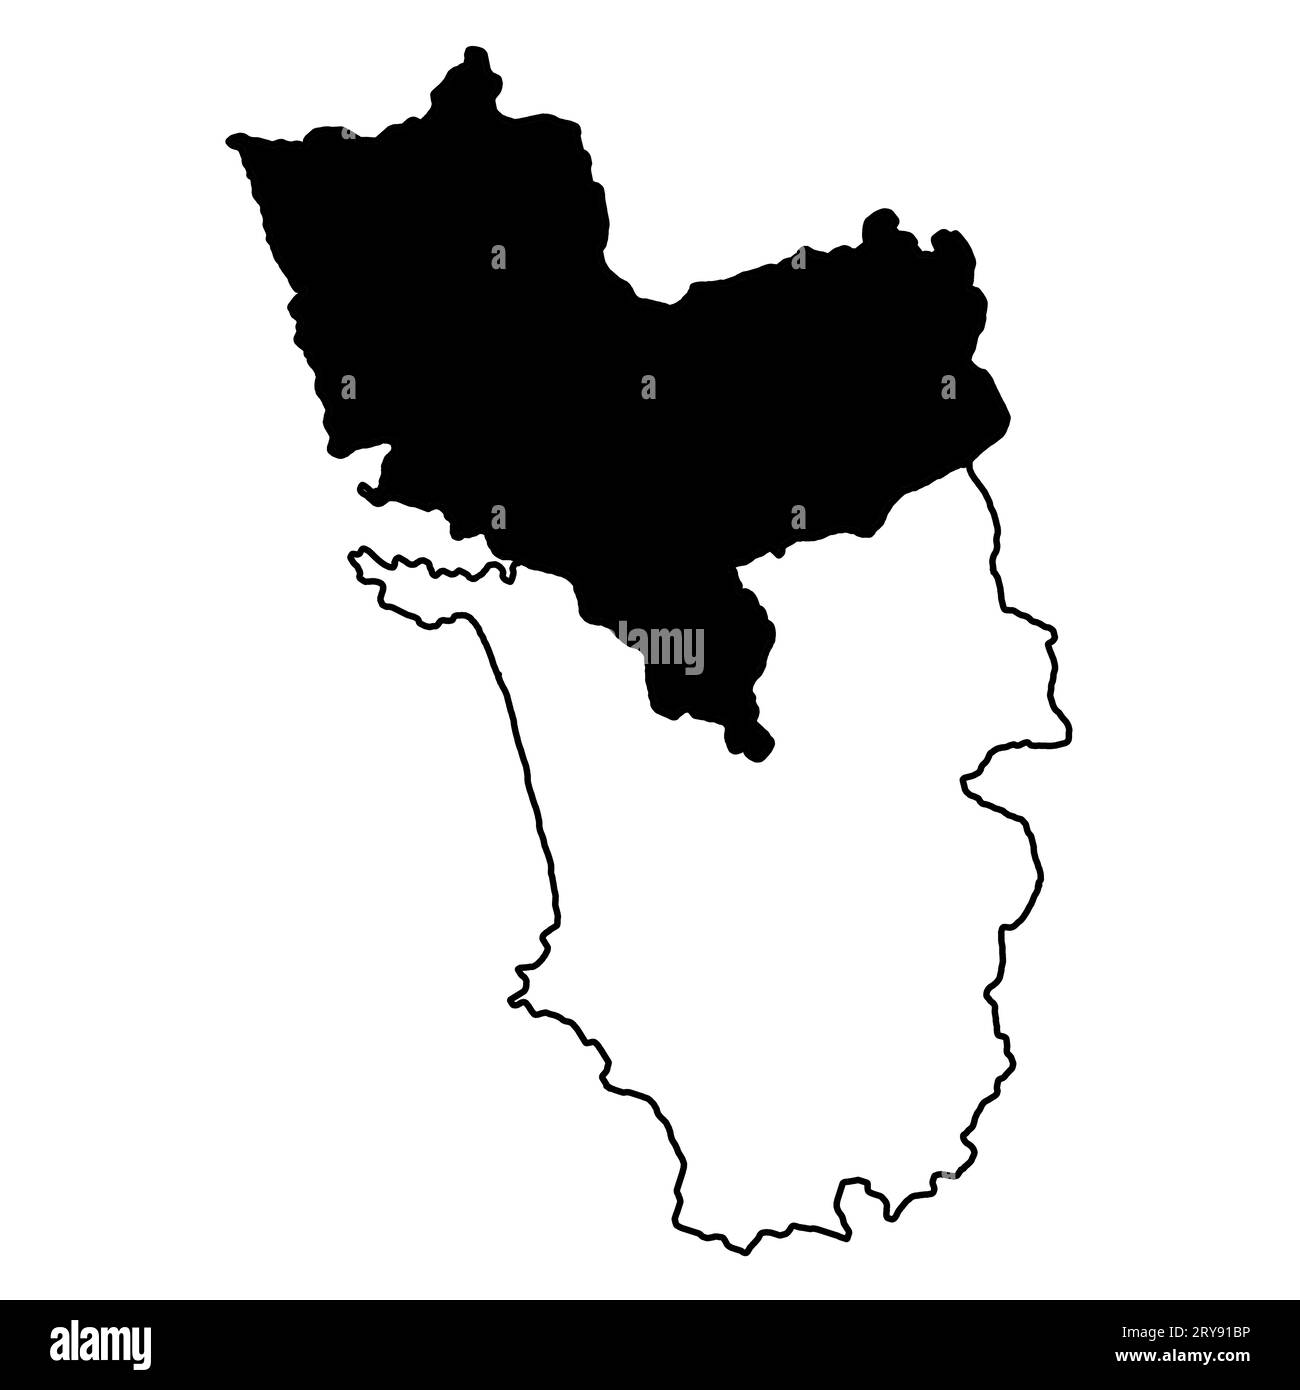 North Goa, India Map Black Silhouette and Outline Isolated on Stock Photo